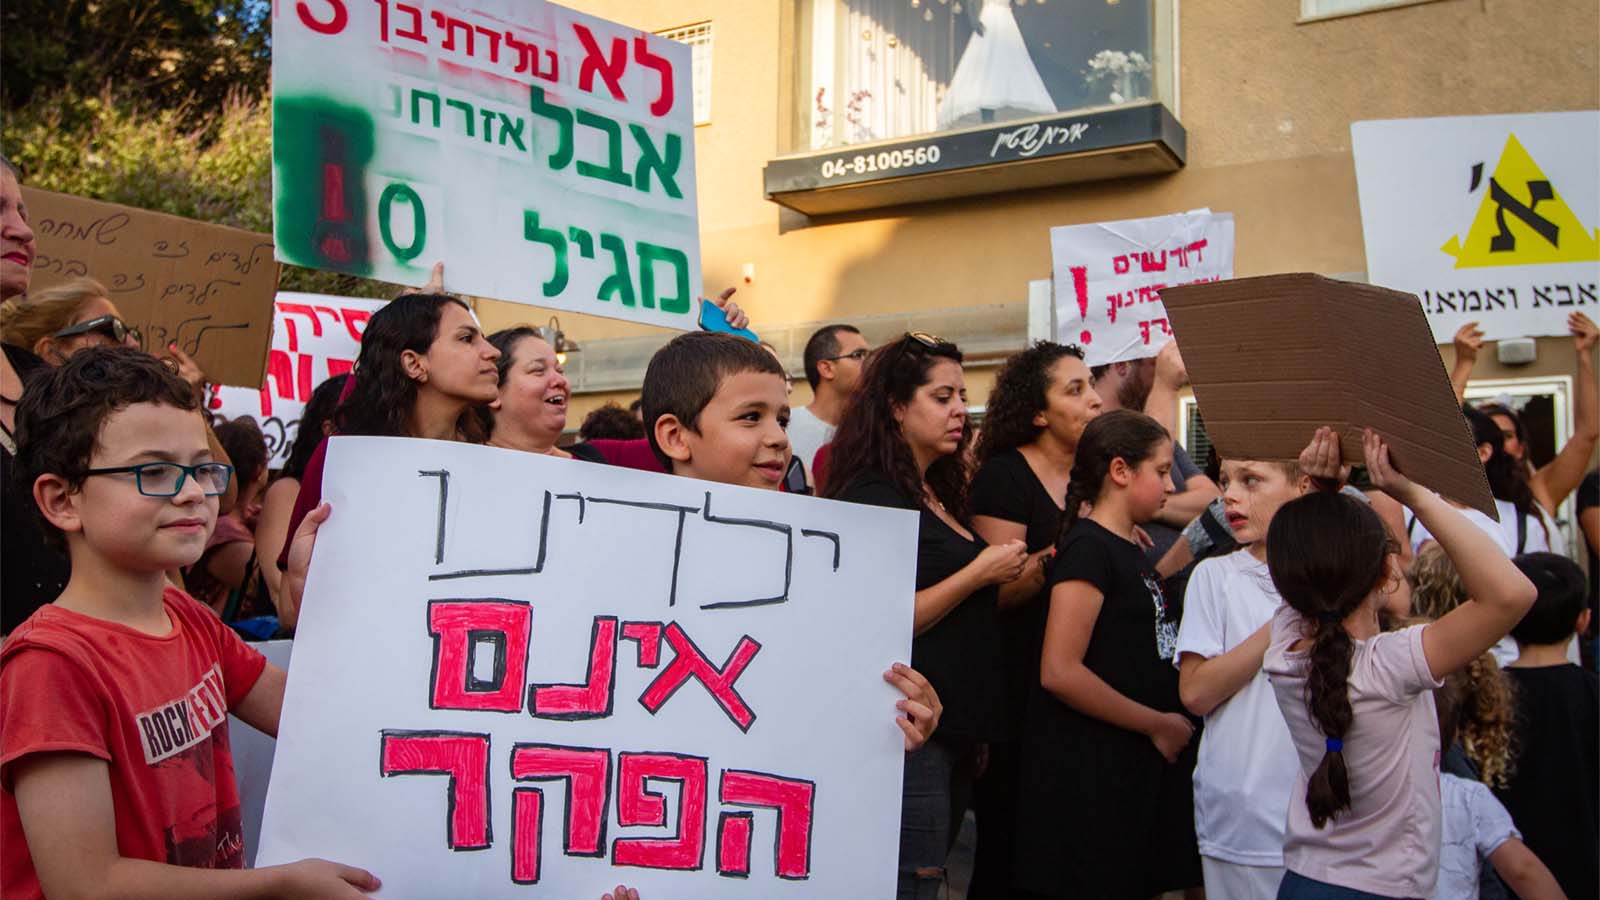 Parents protest with their children against the neglect of the safety of small children in kindergartens, in Haifa, July 7, 2019. Photo by Flash90